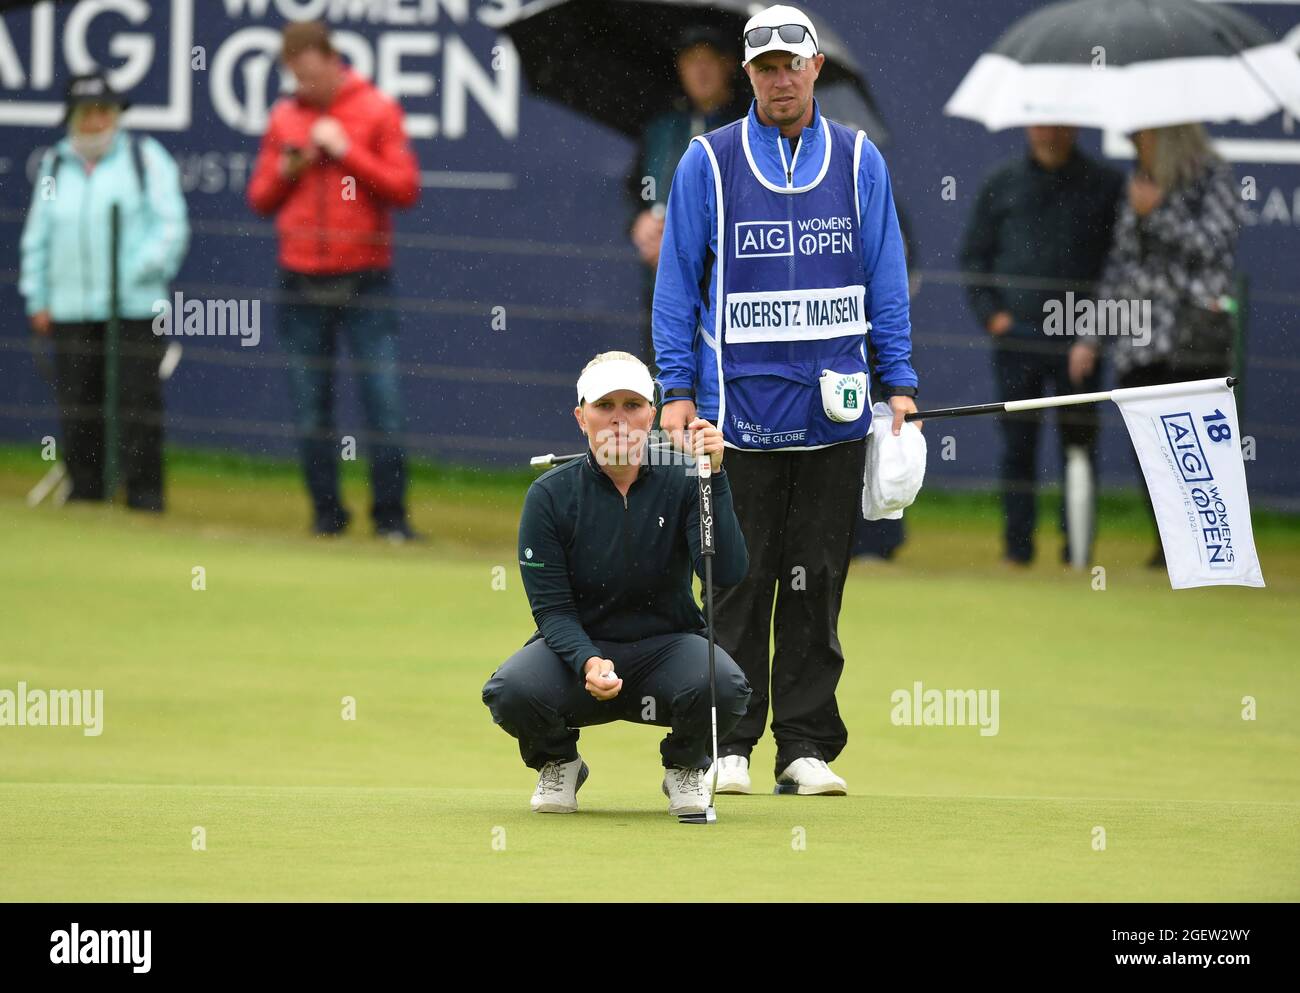 Denmark's Nanna Koerstz Madsen lines up a putt on the 18th green during day three of the AIG Women's Open at Carnoustie. Picture date: Saturday August 21, 2021. See PA story GOLF Women. Photo credit should read: Ian Rutherford/PA Wire. RESTRICTIONS: Use subject to restrictions. Editorial use only, no commercial use without prior consent from rights holder. Stock Photo